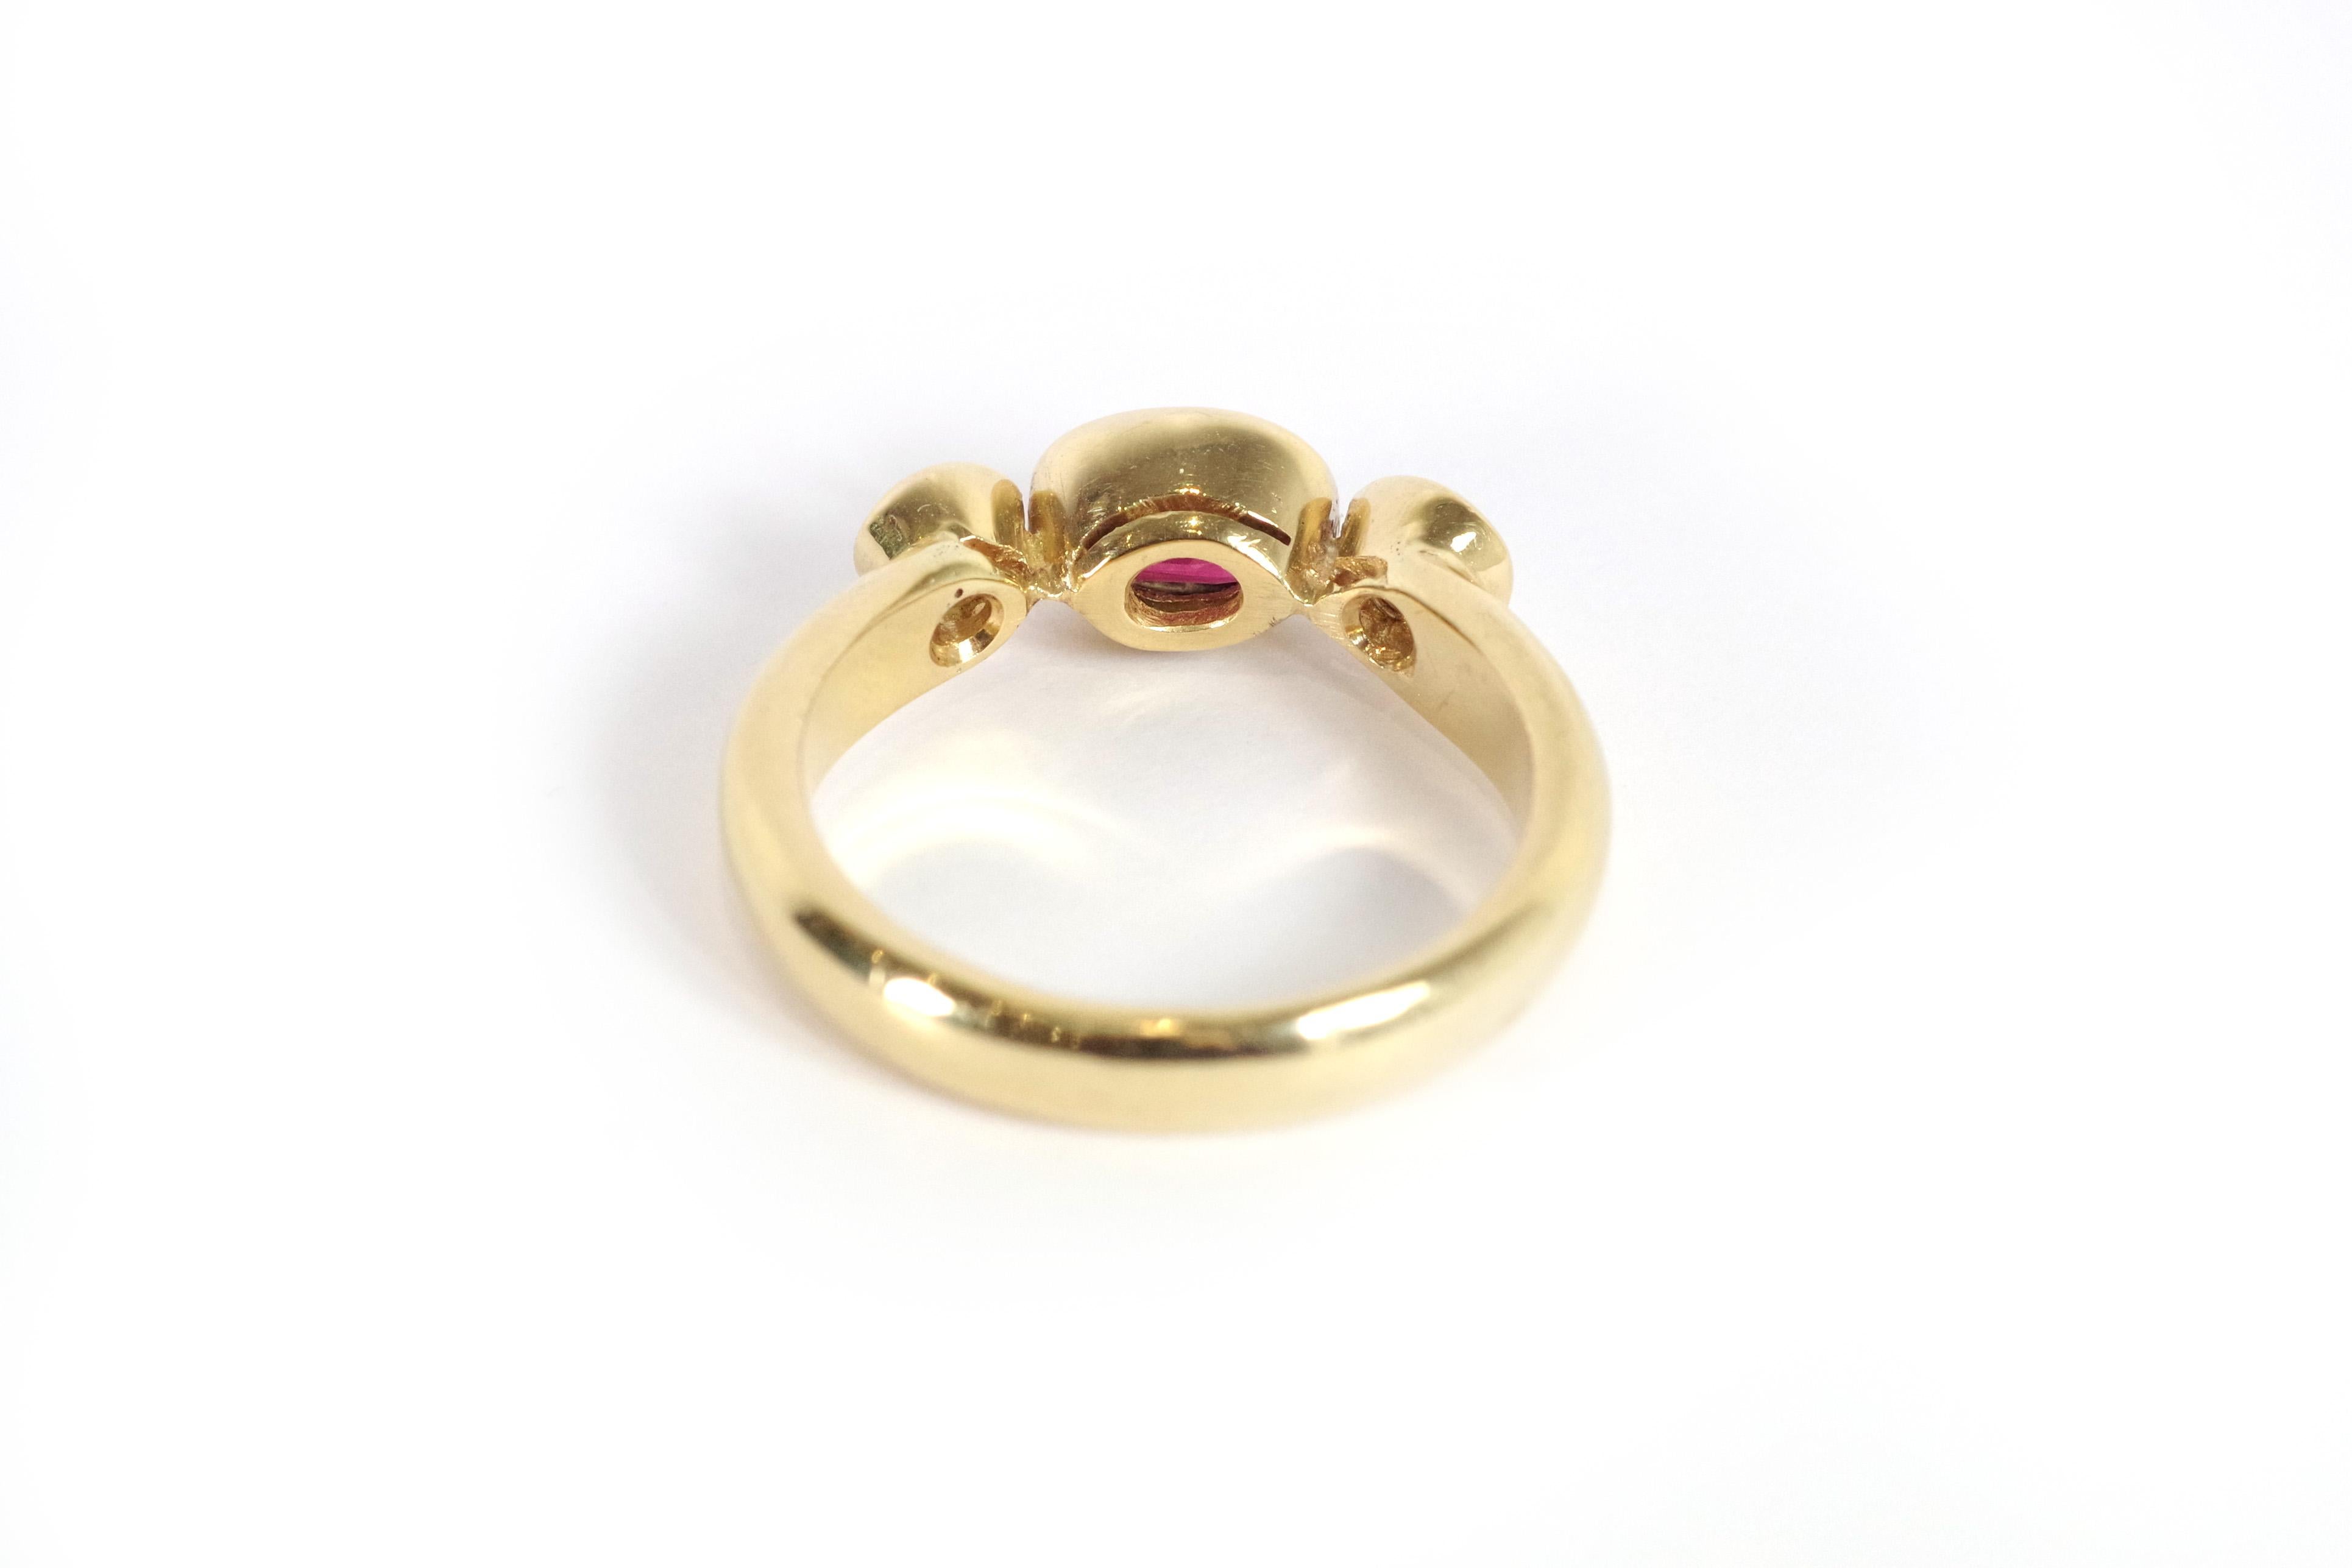 Trilogy ruby and diamond ring in 18k gold, wedding ring For Sale 3